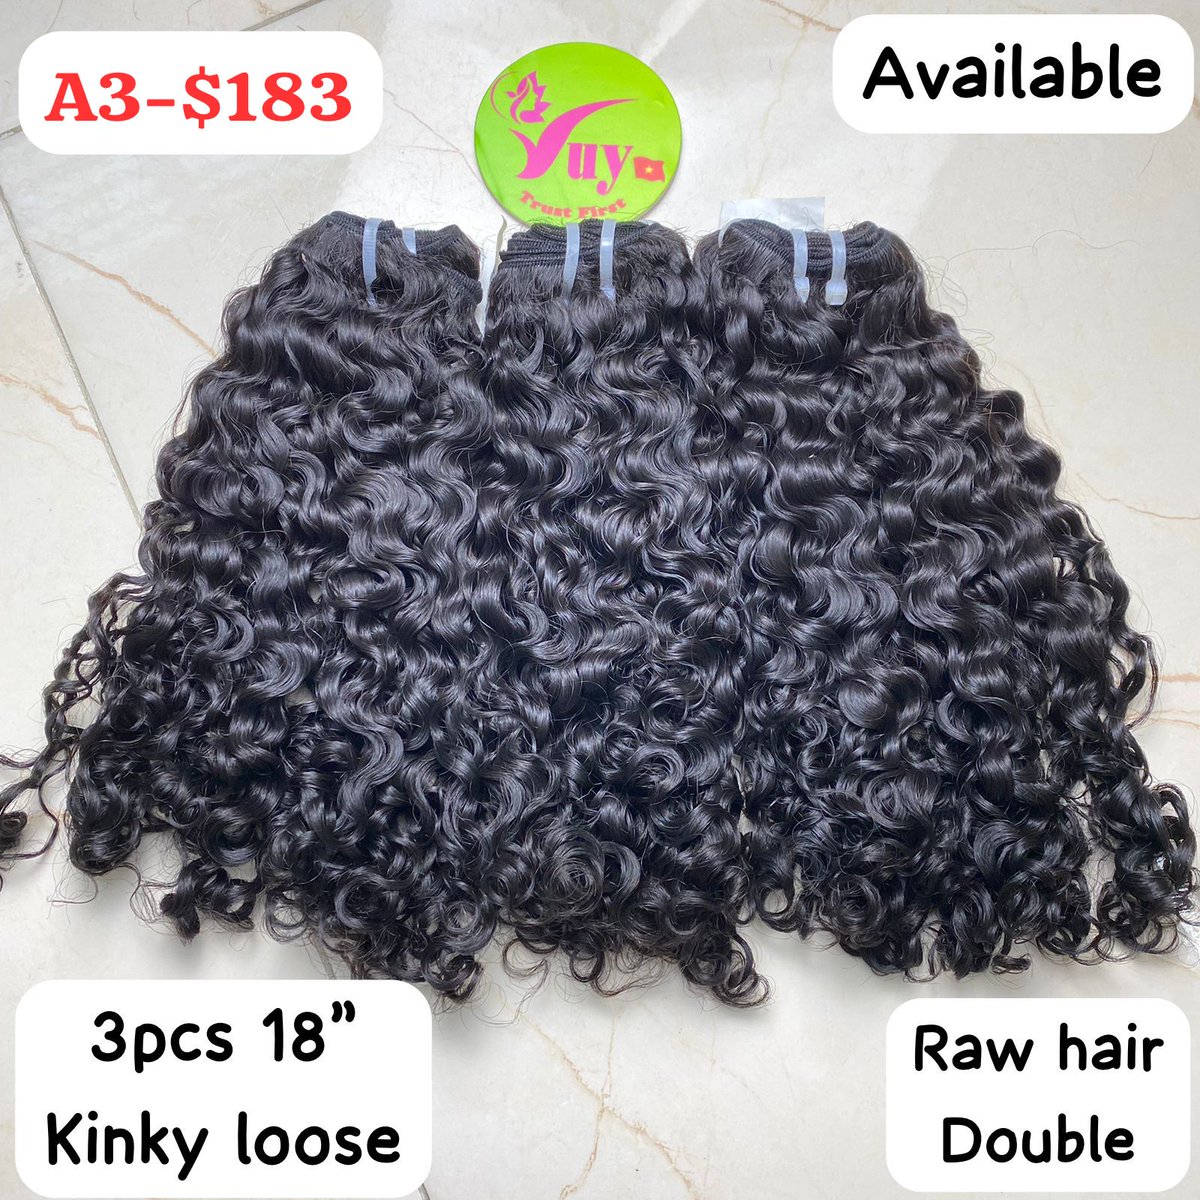 Kinky Loose With Raw Hair From VUY VietNam 🥰Contact With Me On Whatsapp +84396092128 #RawHairExtensions #NaturalHairExtensions #RawVirginHair #UnprocessedHair #RawHairVendor #HairExtensions #HairWeaves #RawIndianHair #VirginHairExtensions #RealHairExtensions #RawHairBundle